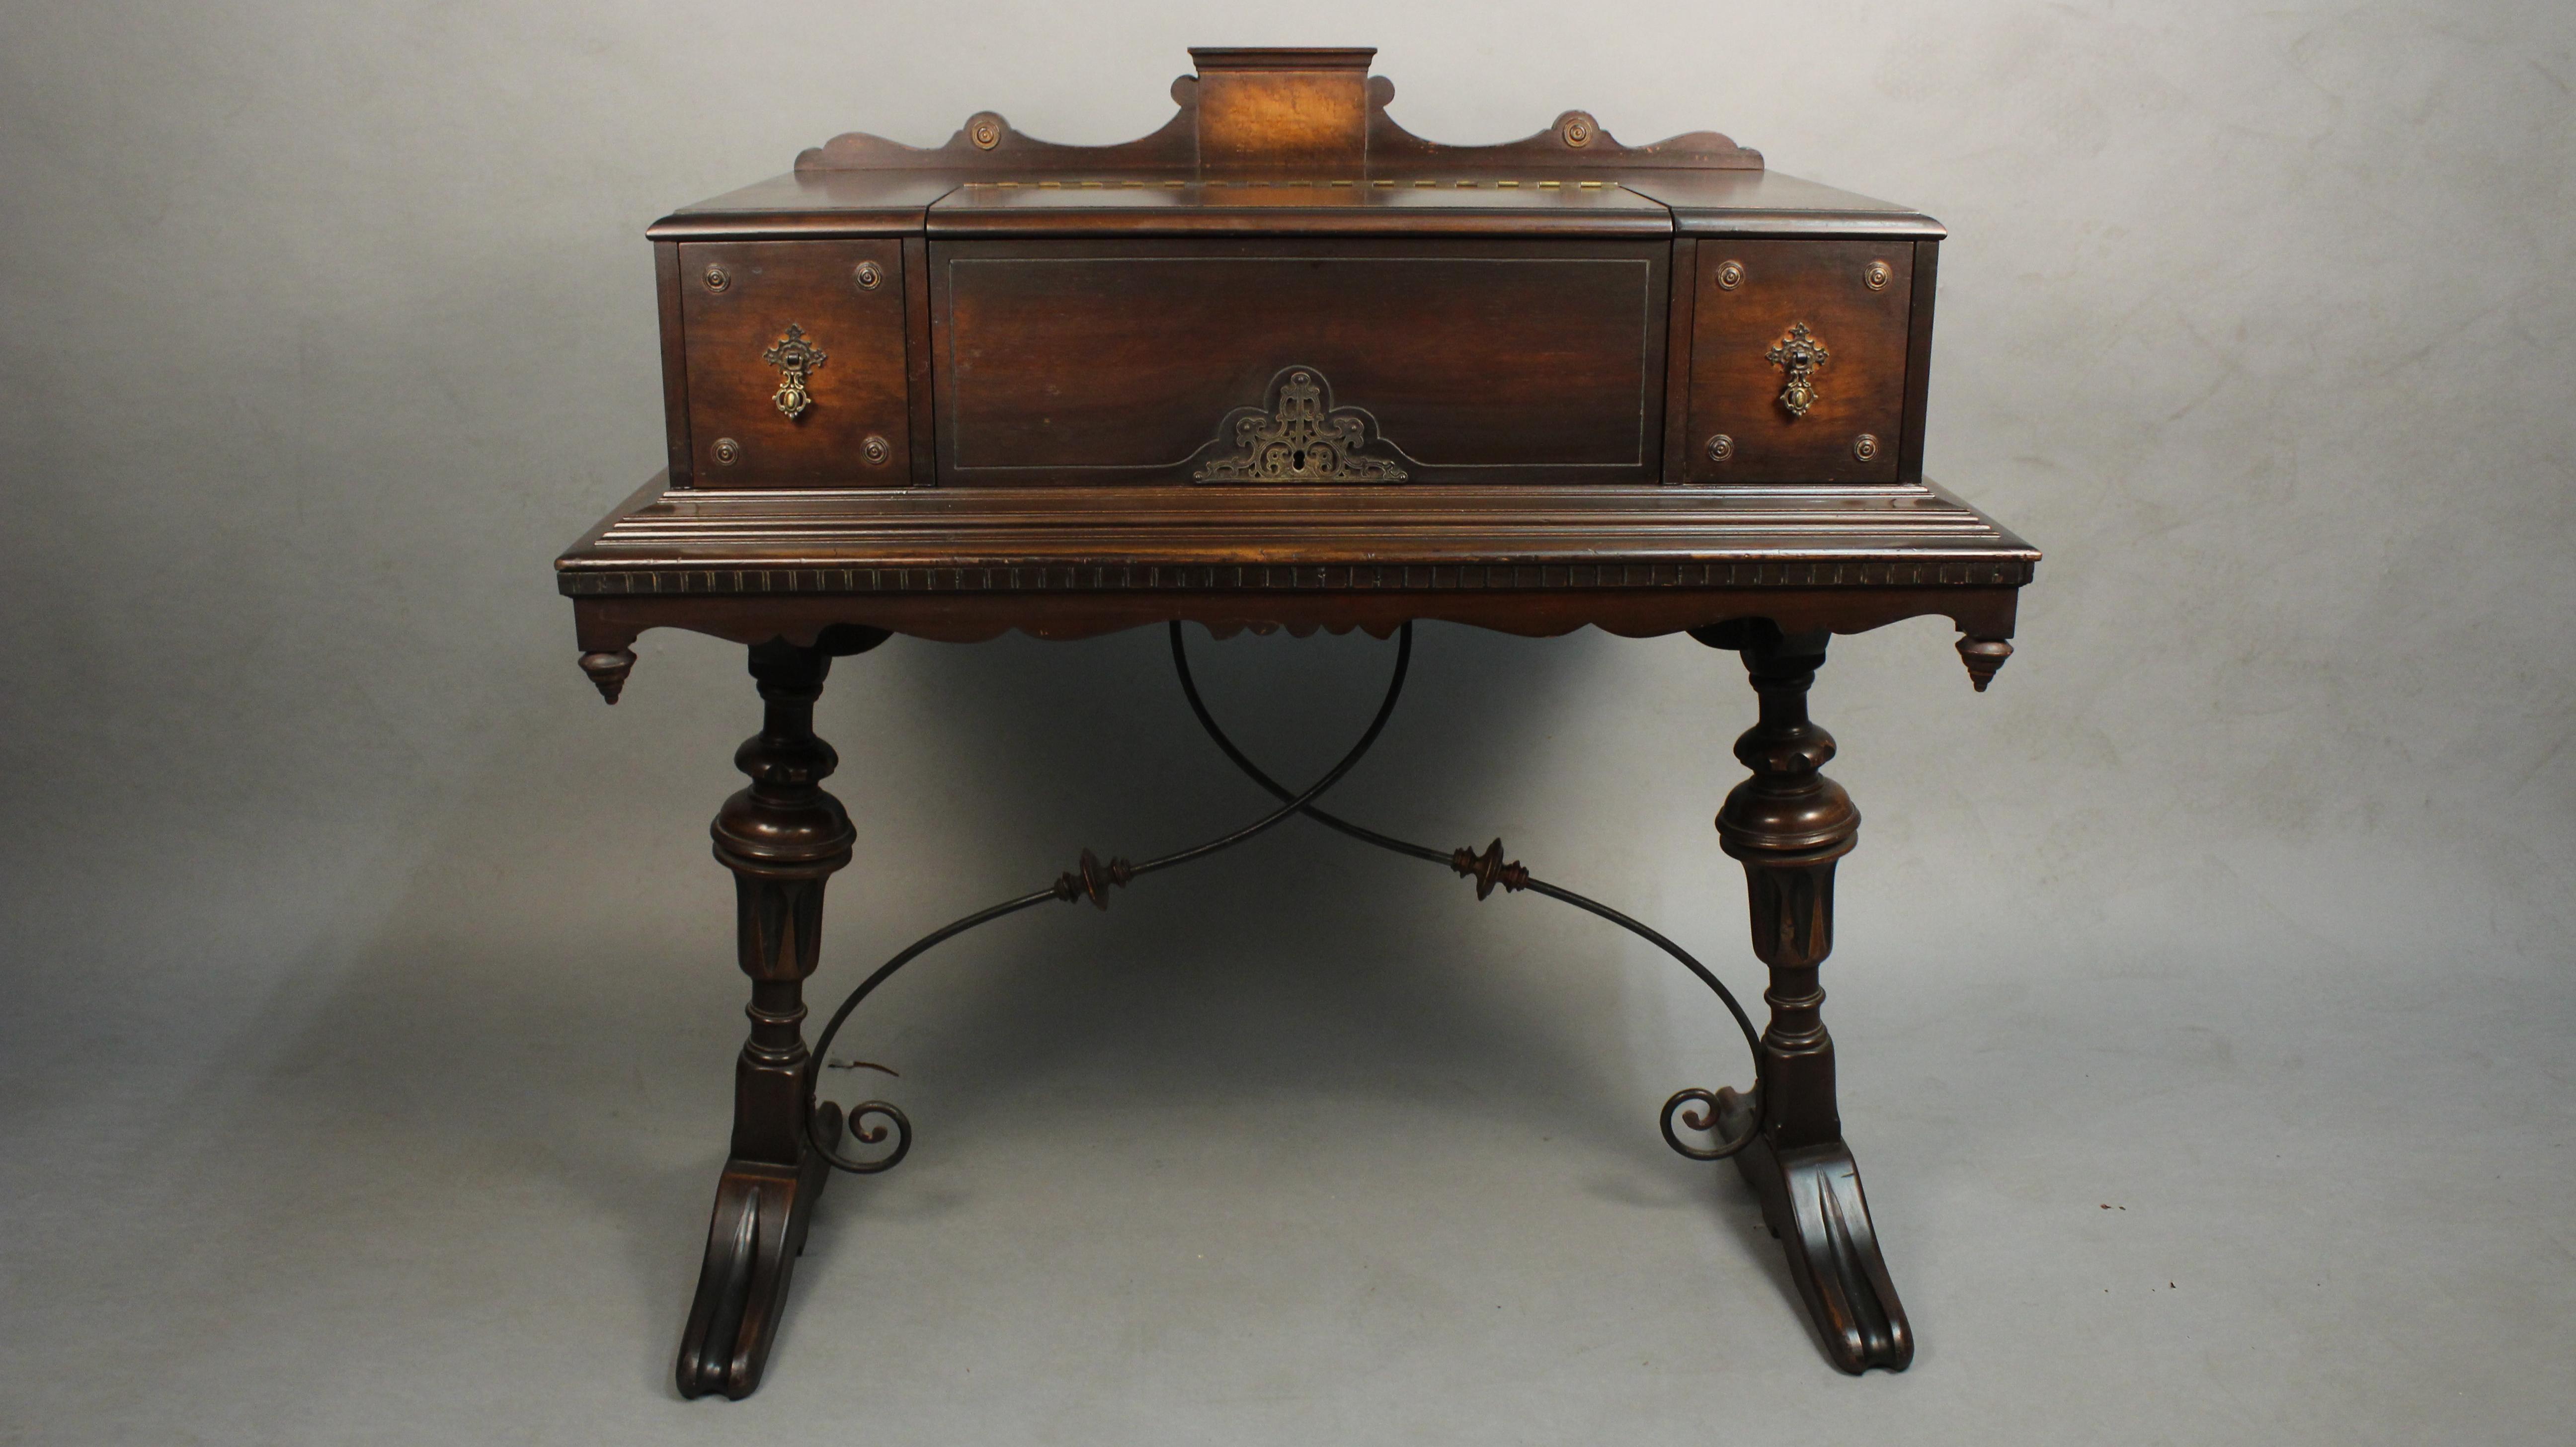 Walnut writing table with splayed legs and iron stretcher, circa 1920s. Original finish. 40